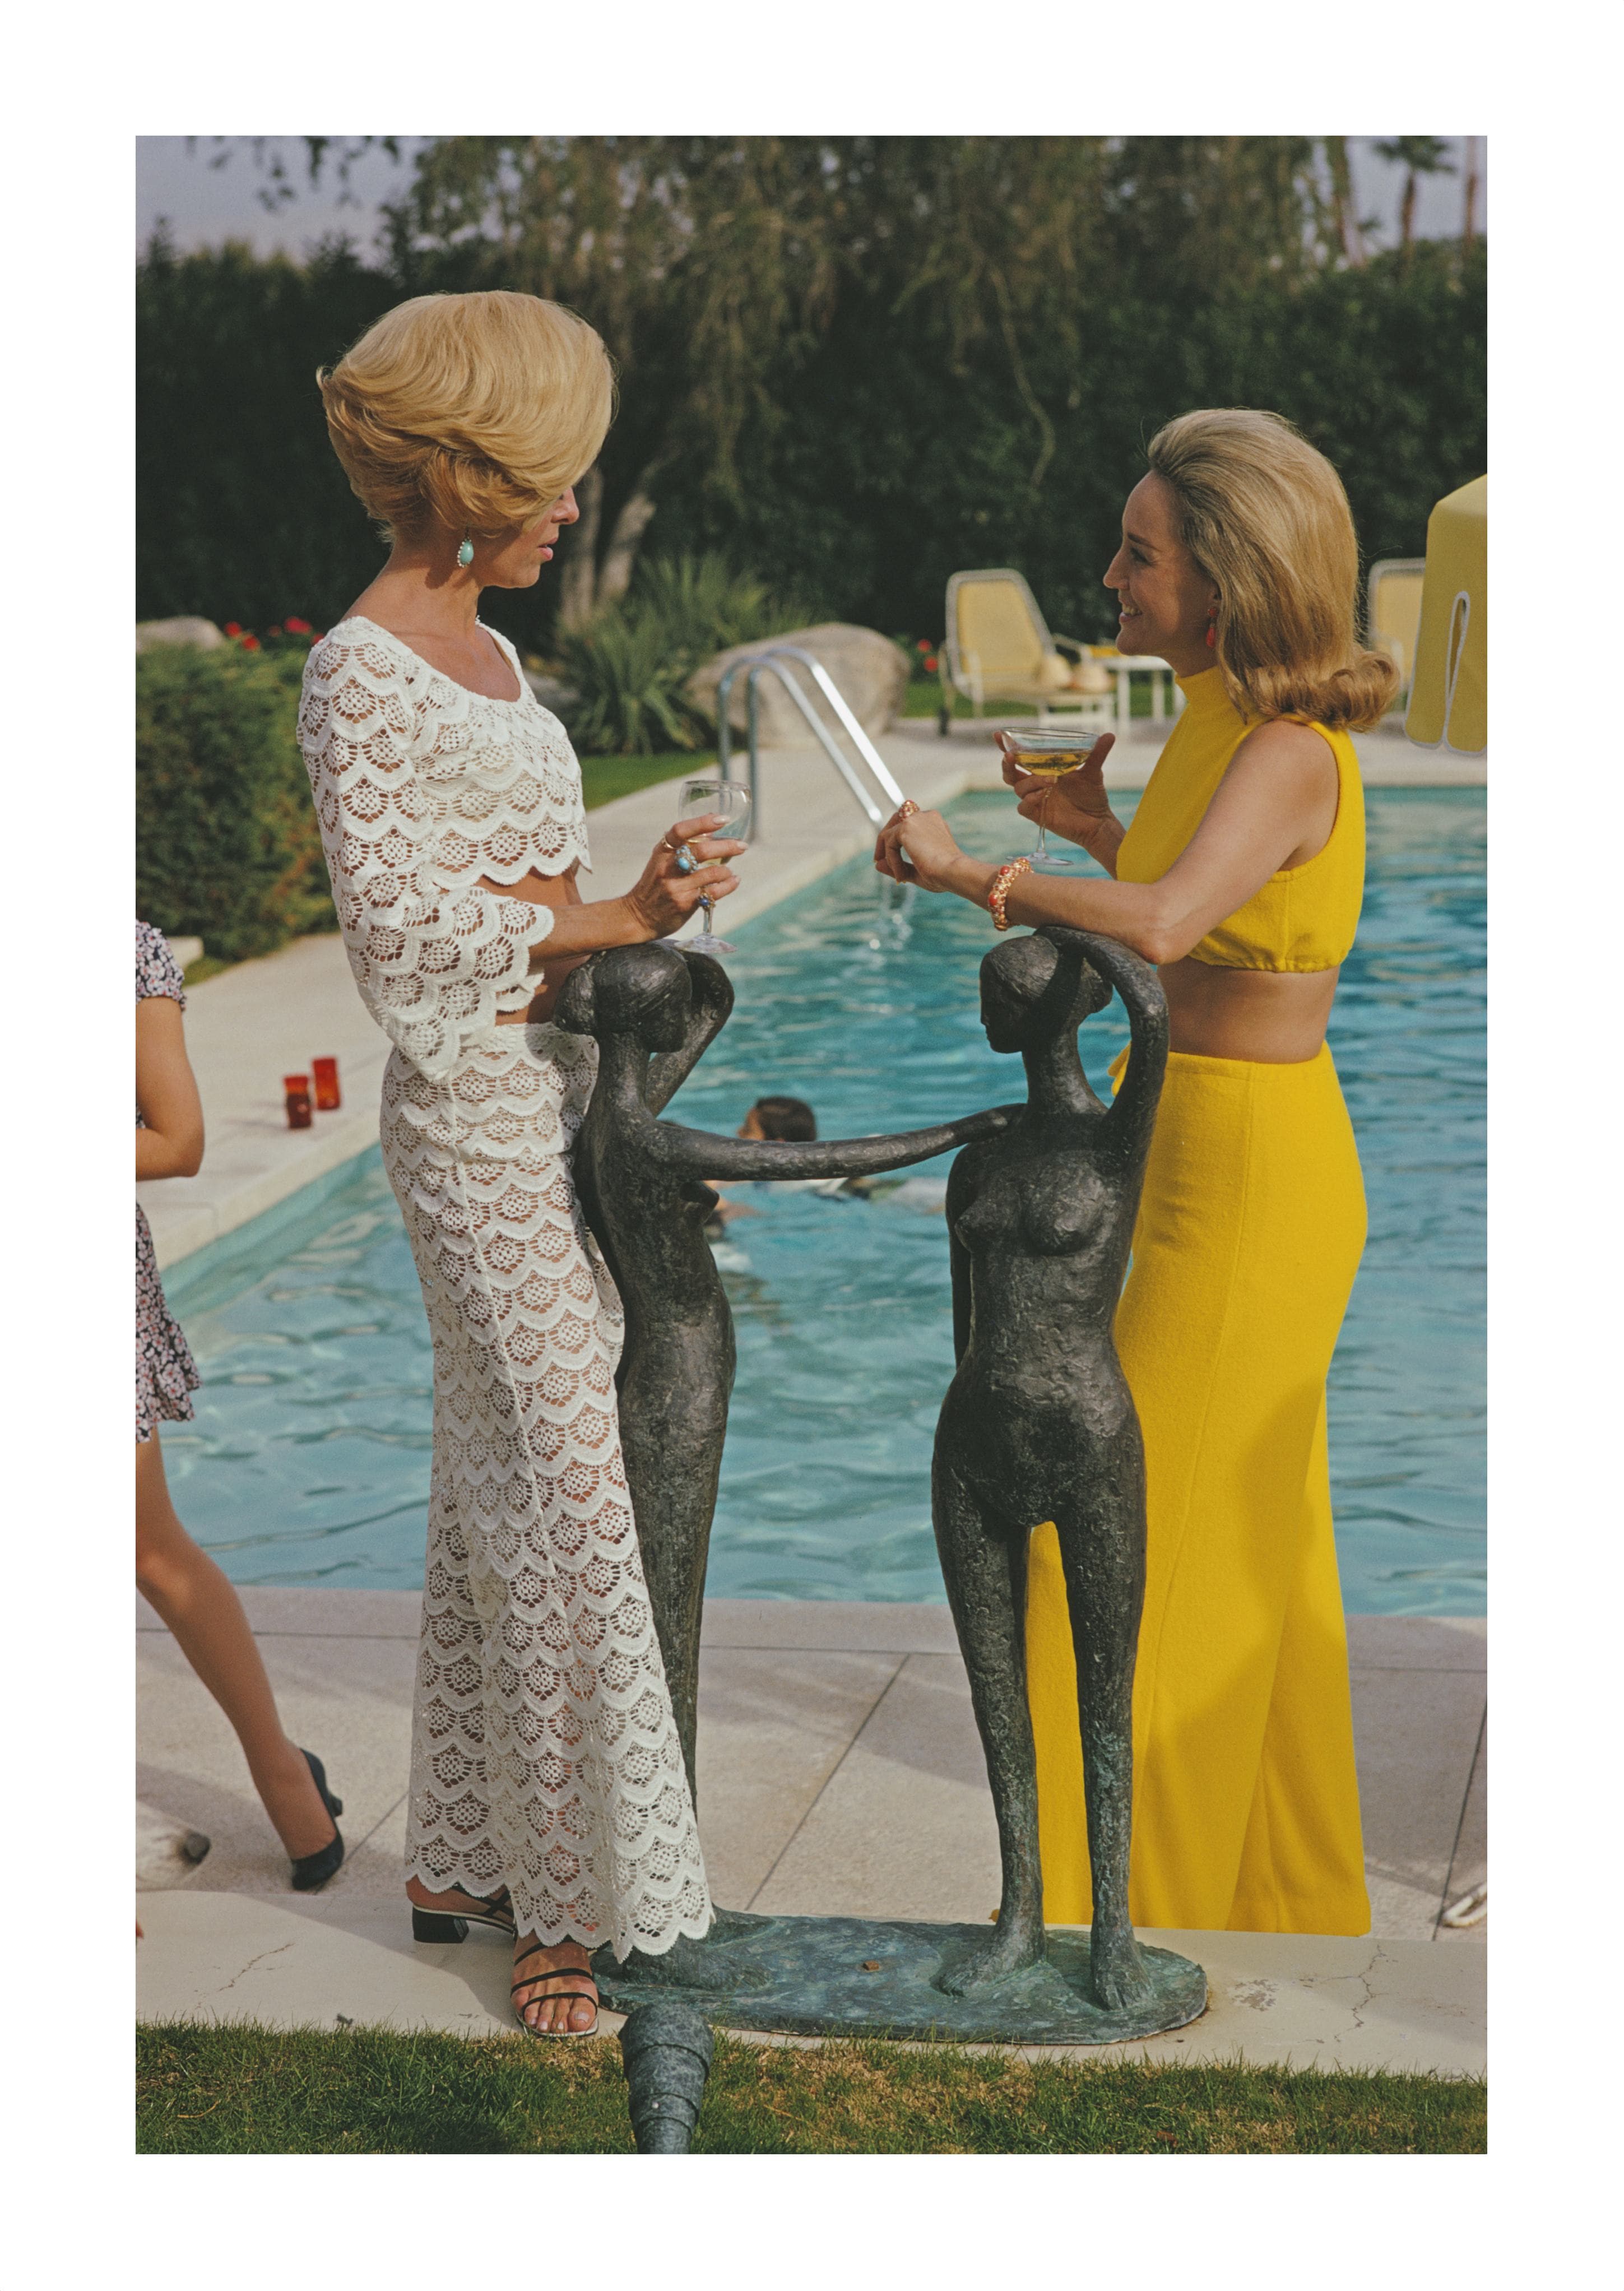 Image of Helen And Nelda By The Pool, C-Type Print artwork by Slim Aarons, free delivery